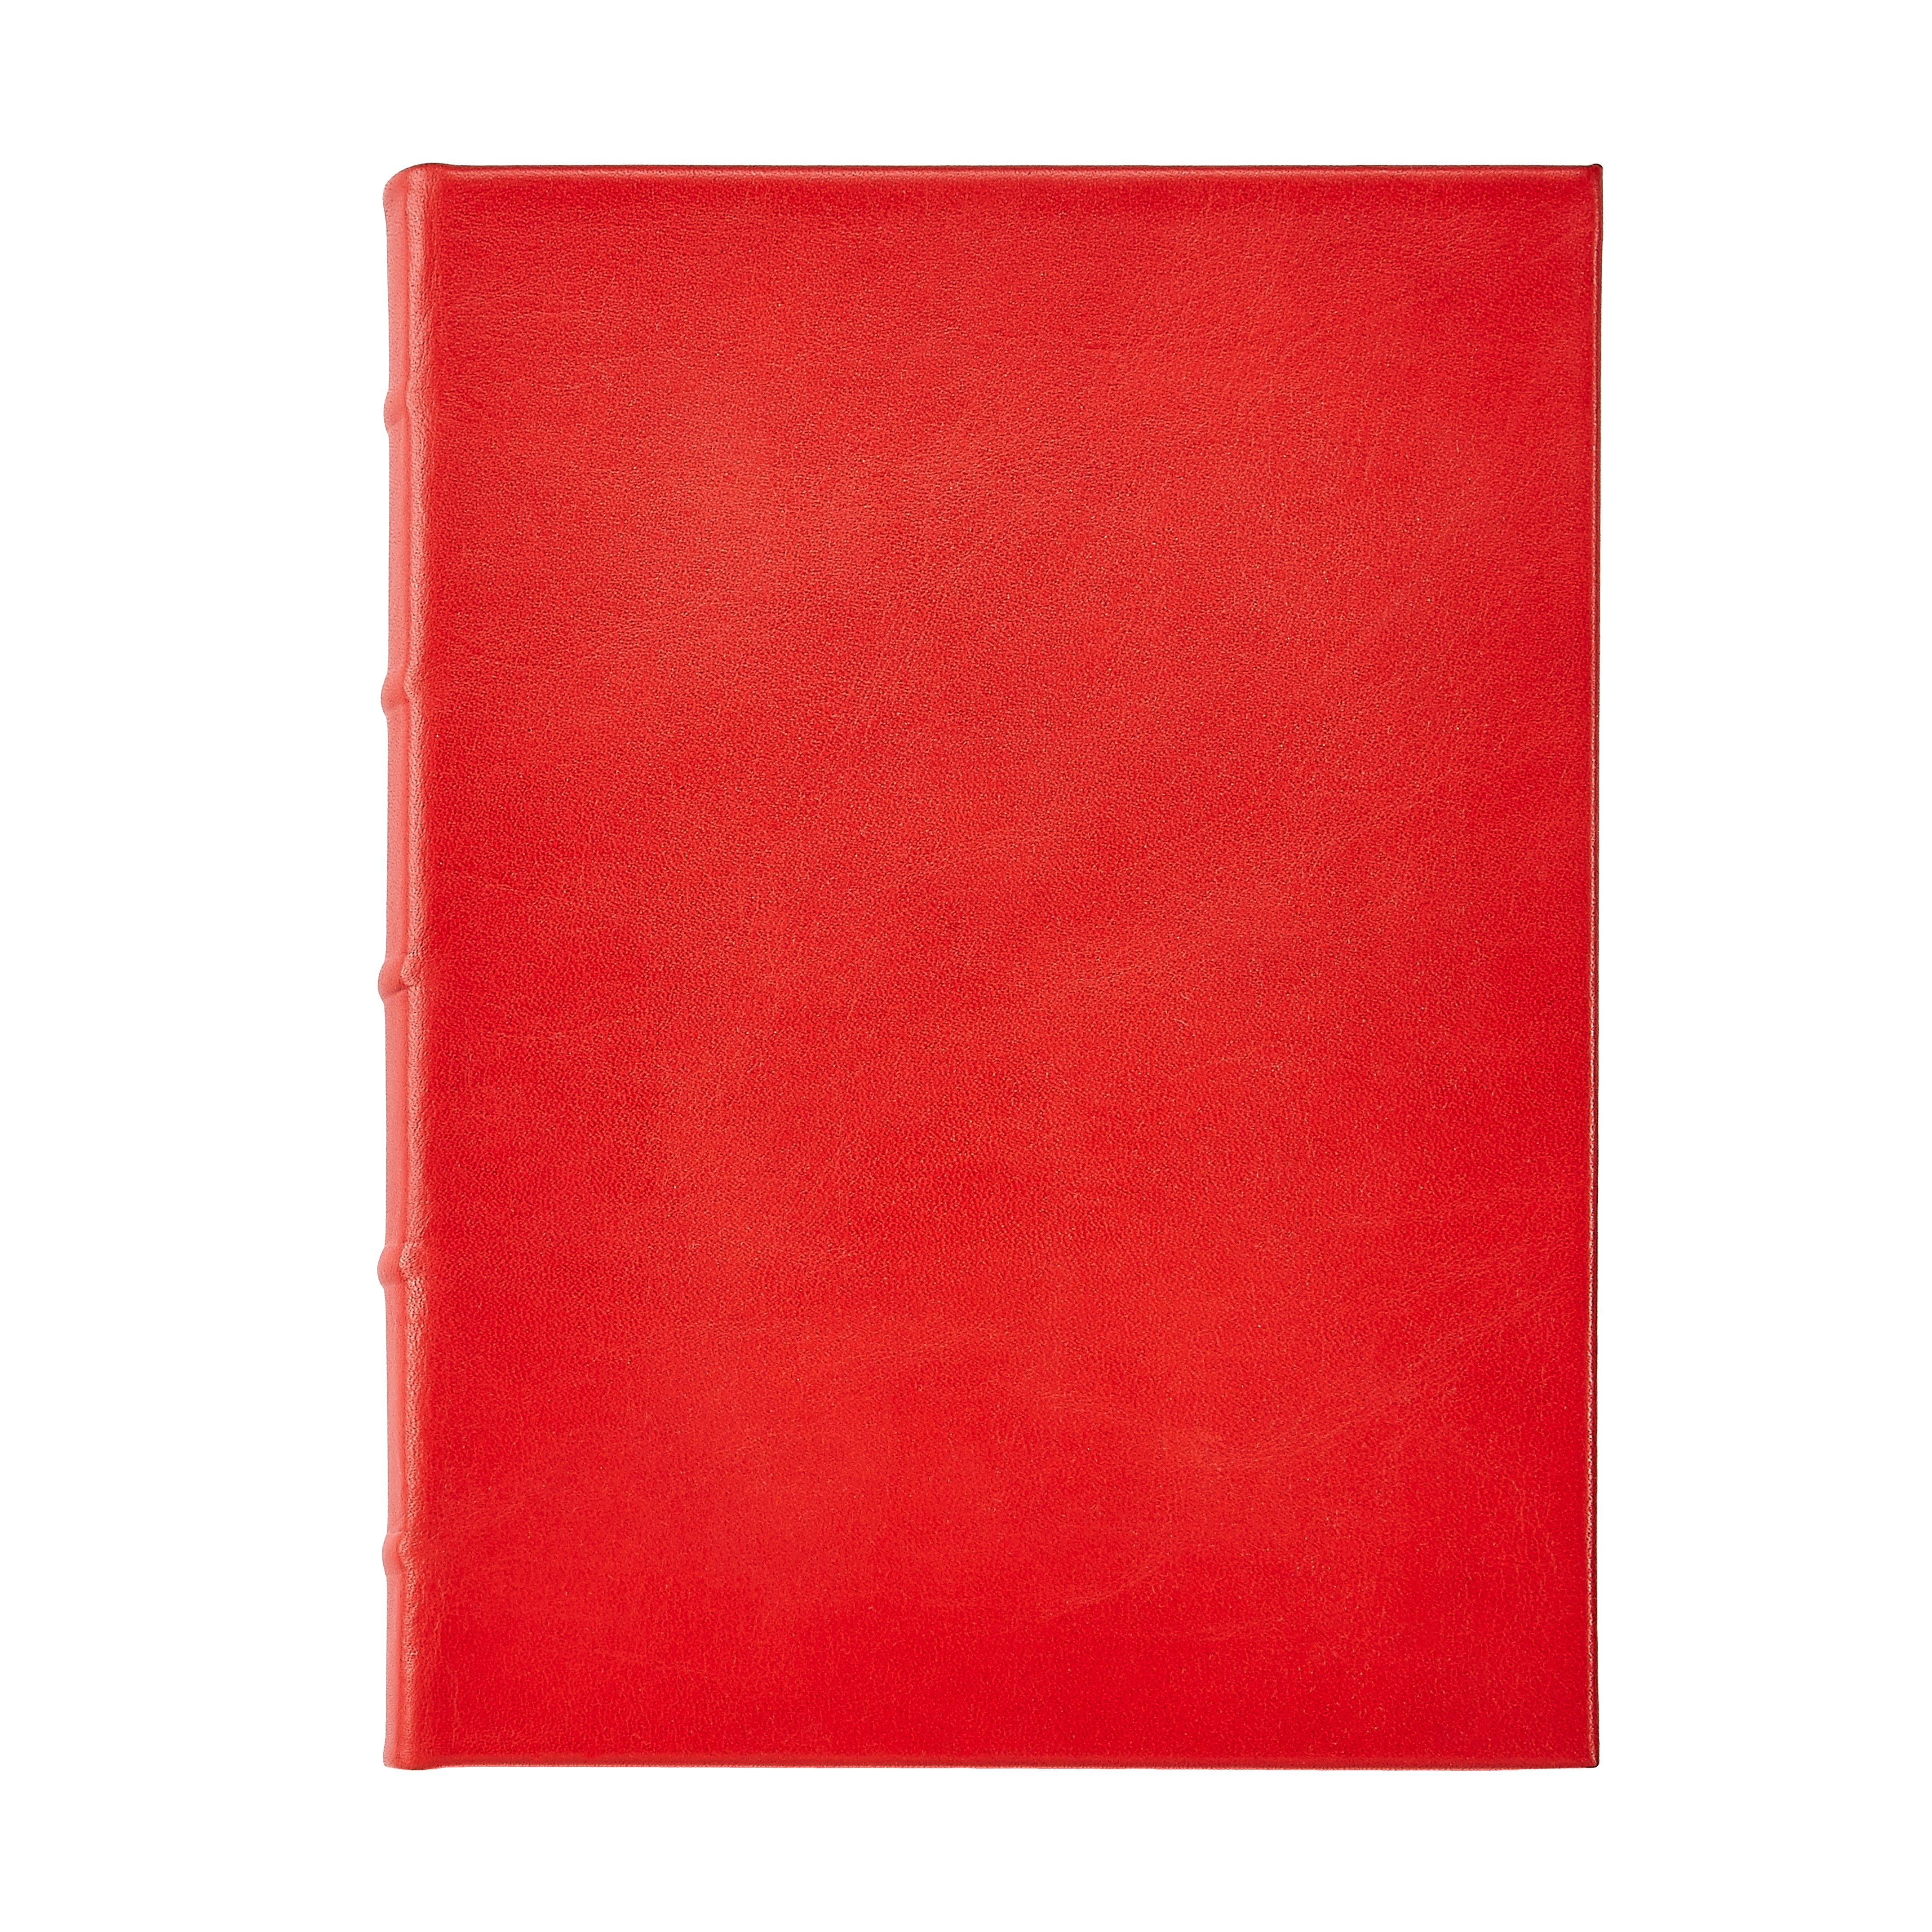 Graphic Image 9 Hardcover Journal Red Traditional Leather